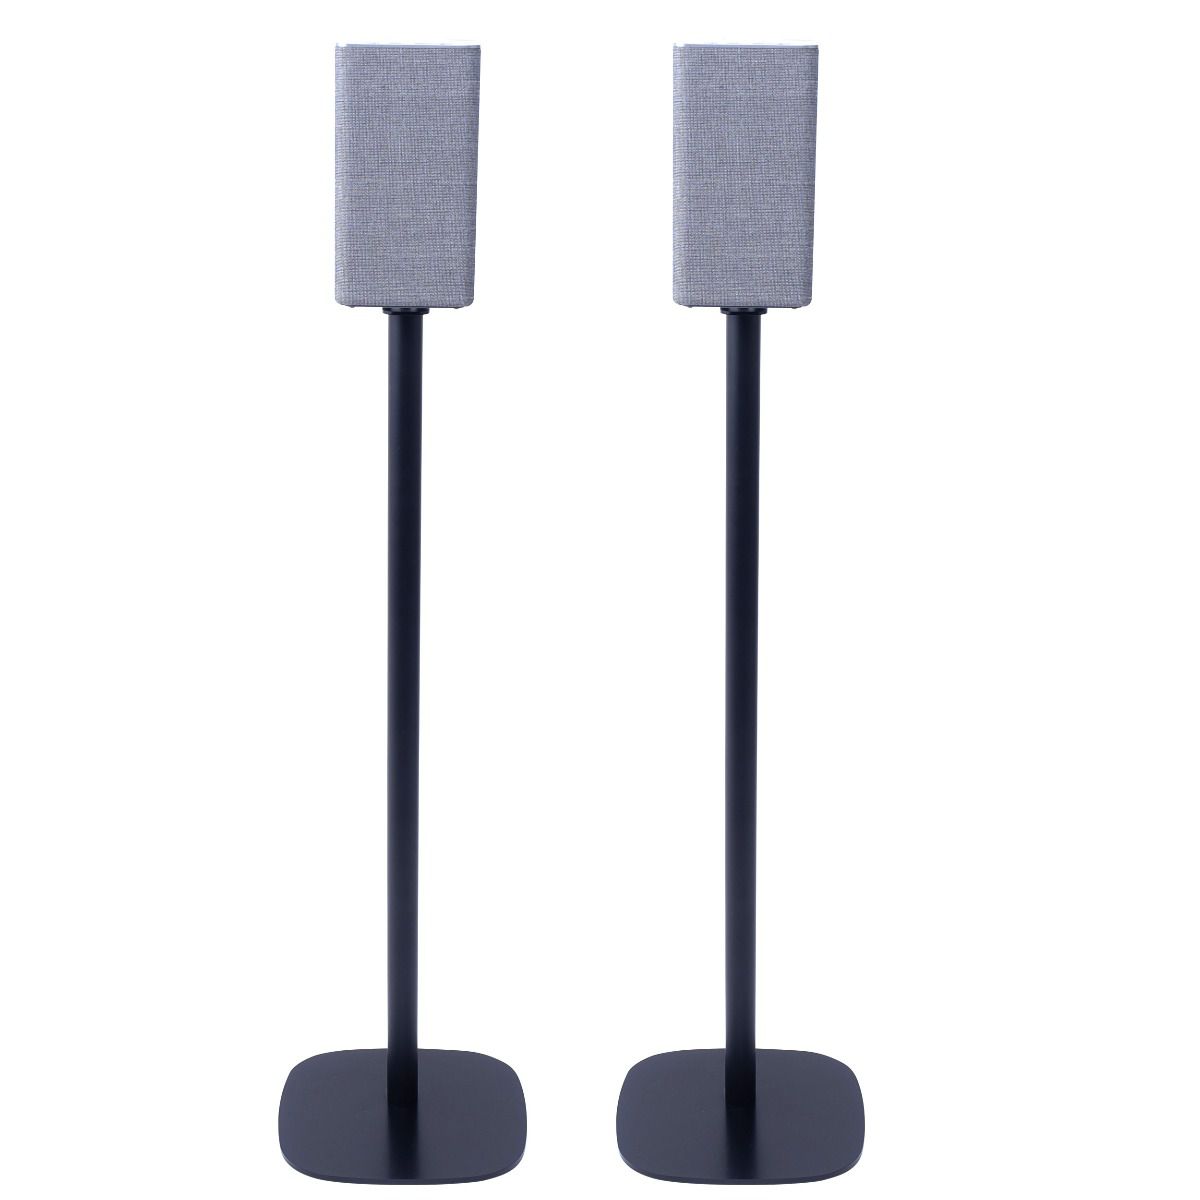 Vebos floor stand TAW6205 black | The stand for Philips TAW6205